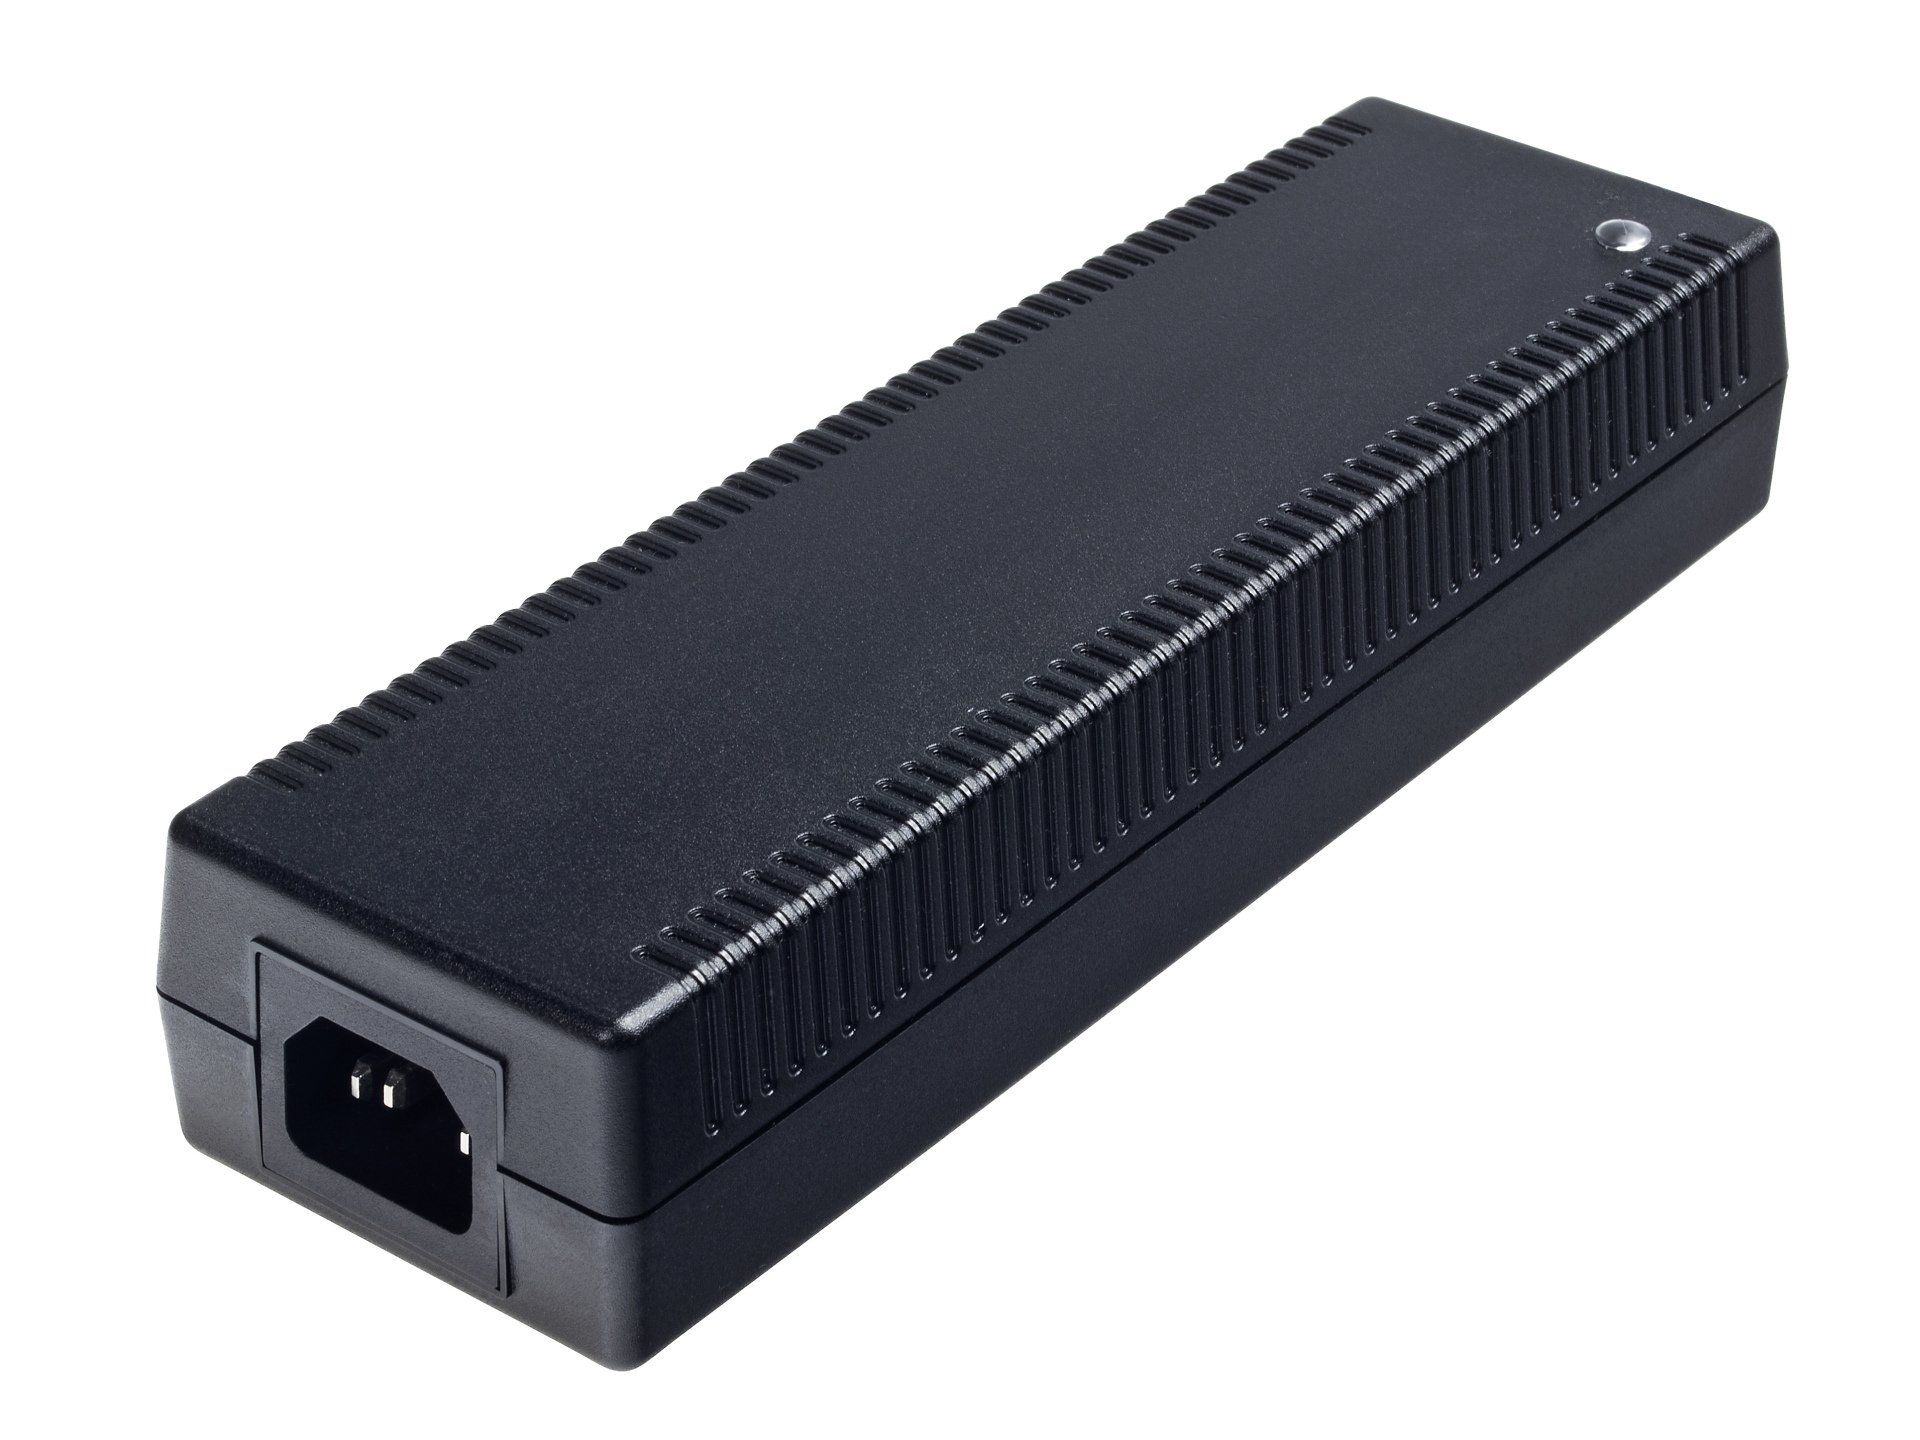 A black desktop power supply with two outlets on the side